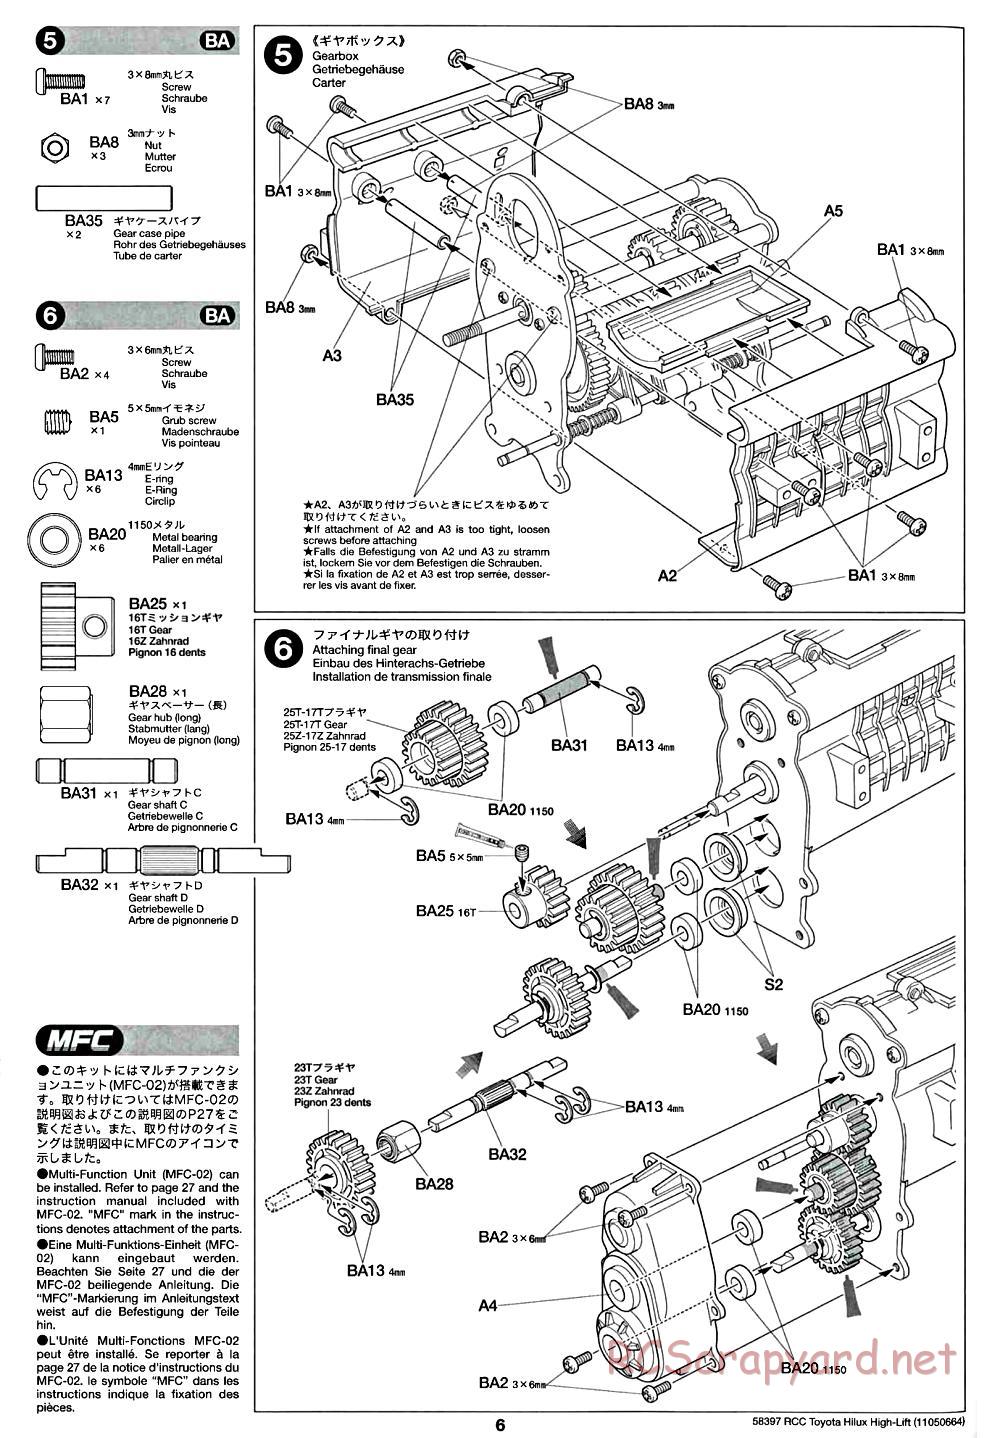 Tamiya - Toyota Hilux High-Lift Chassis - Manual - Page 6